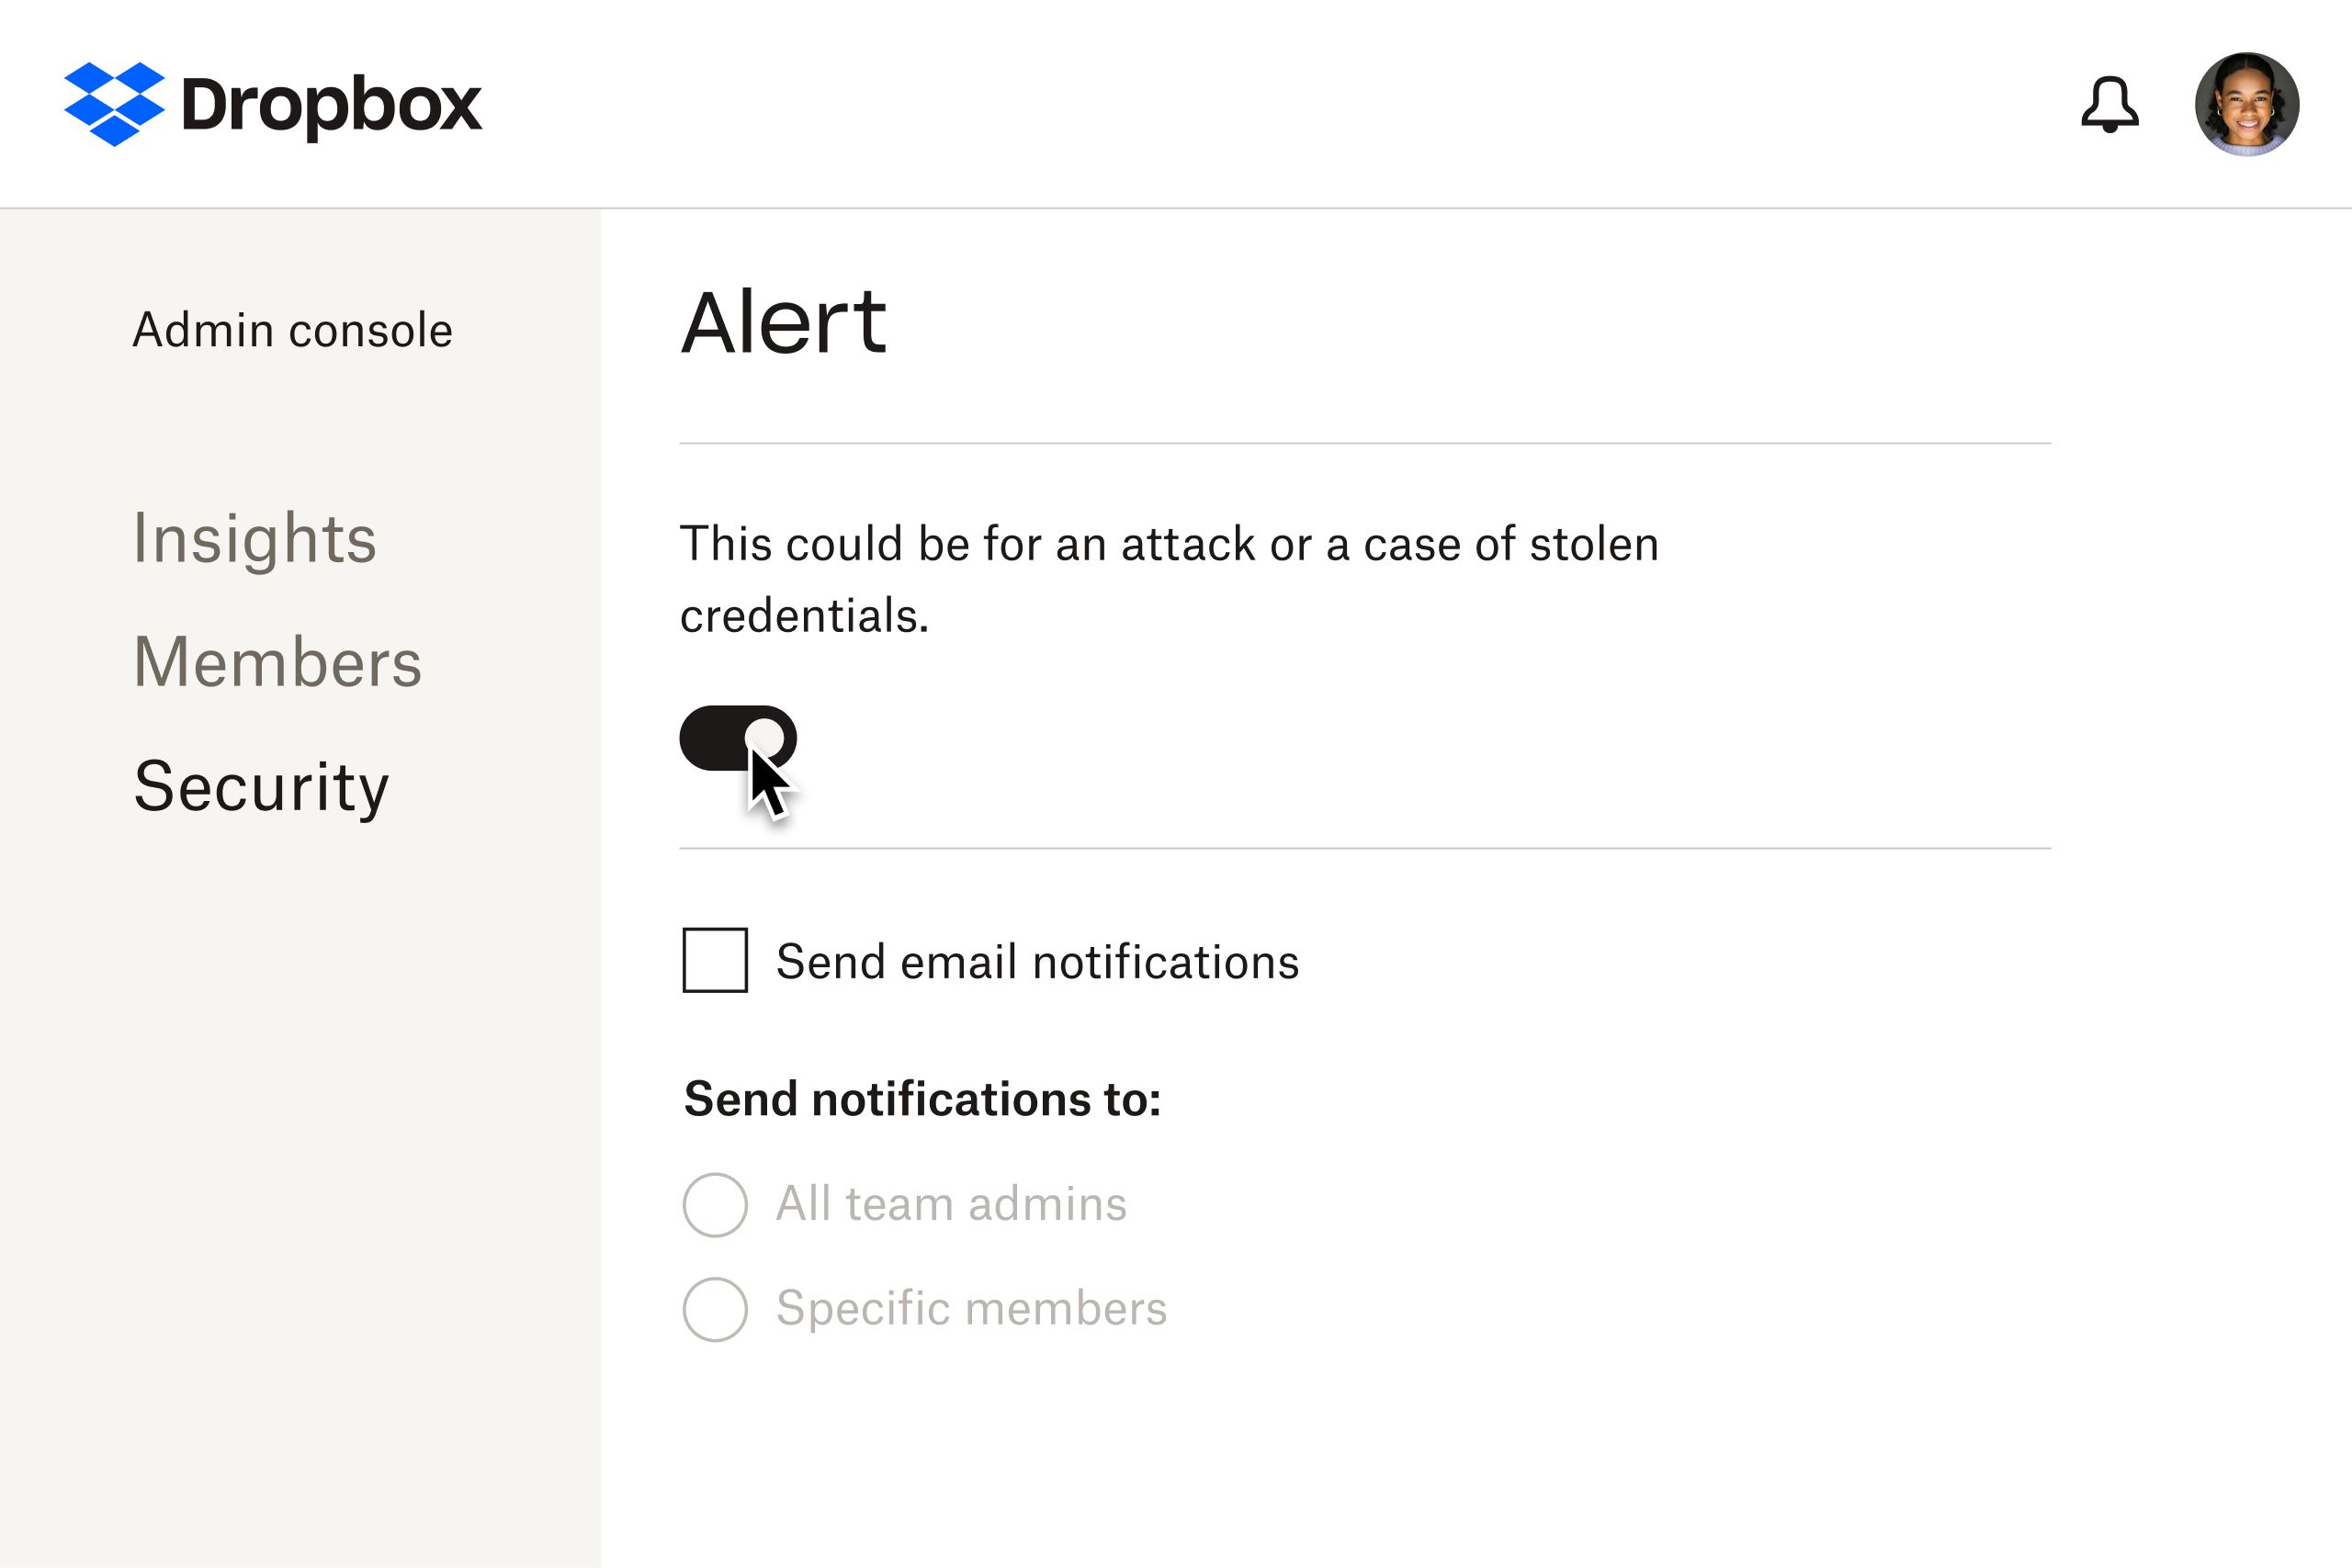 A visual example of the alert settings available to admins in the event of a potential security breach.